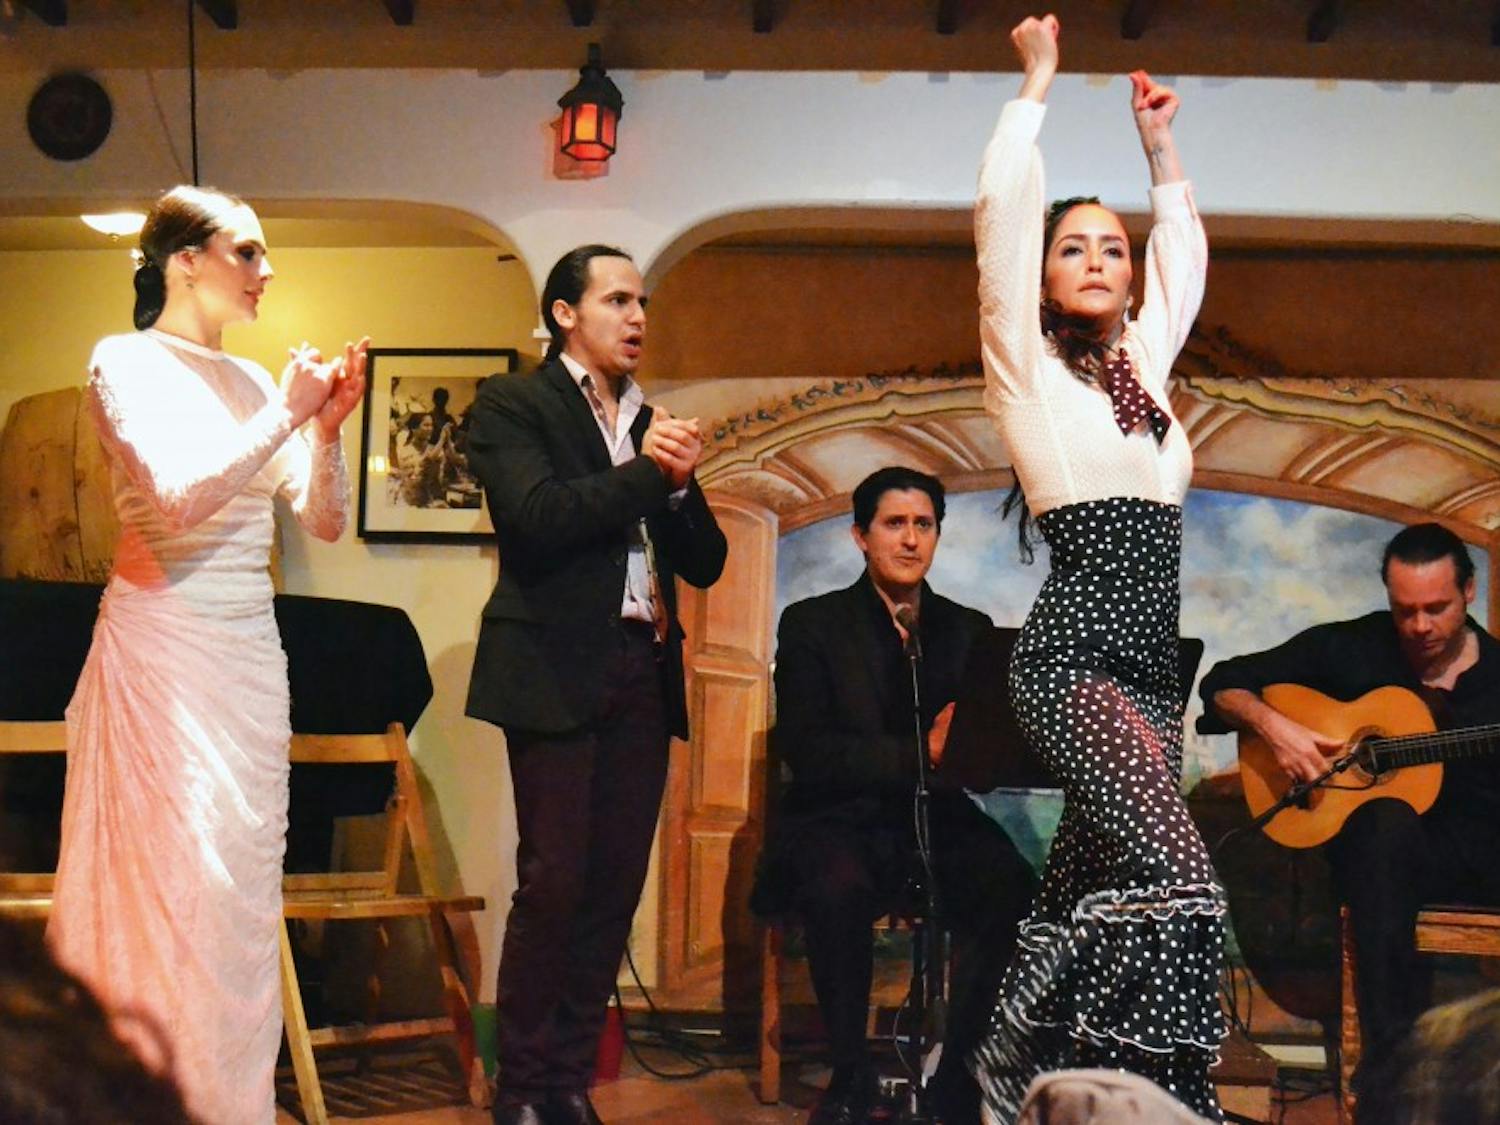 A group of Flamenco artists perform at the El Meson restaurant Saturday night in Santa Fe, New Mexico. Alisa Alba, a UNM dance instructor, puts the finishing touches on one of the dances as the rest of the ensemble cheers her on.